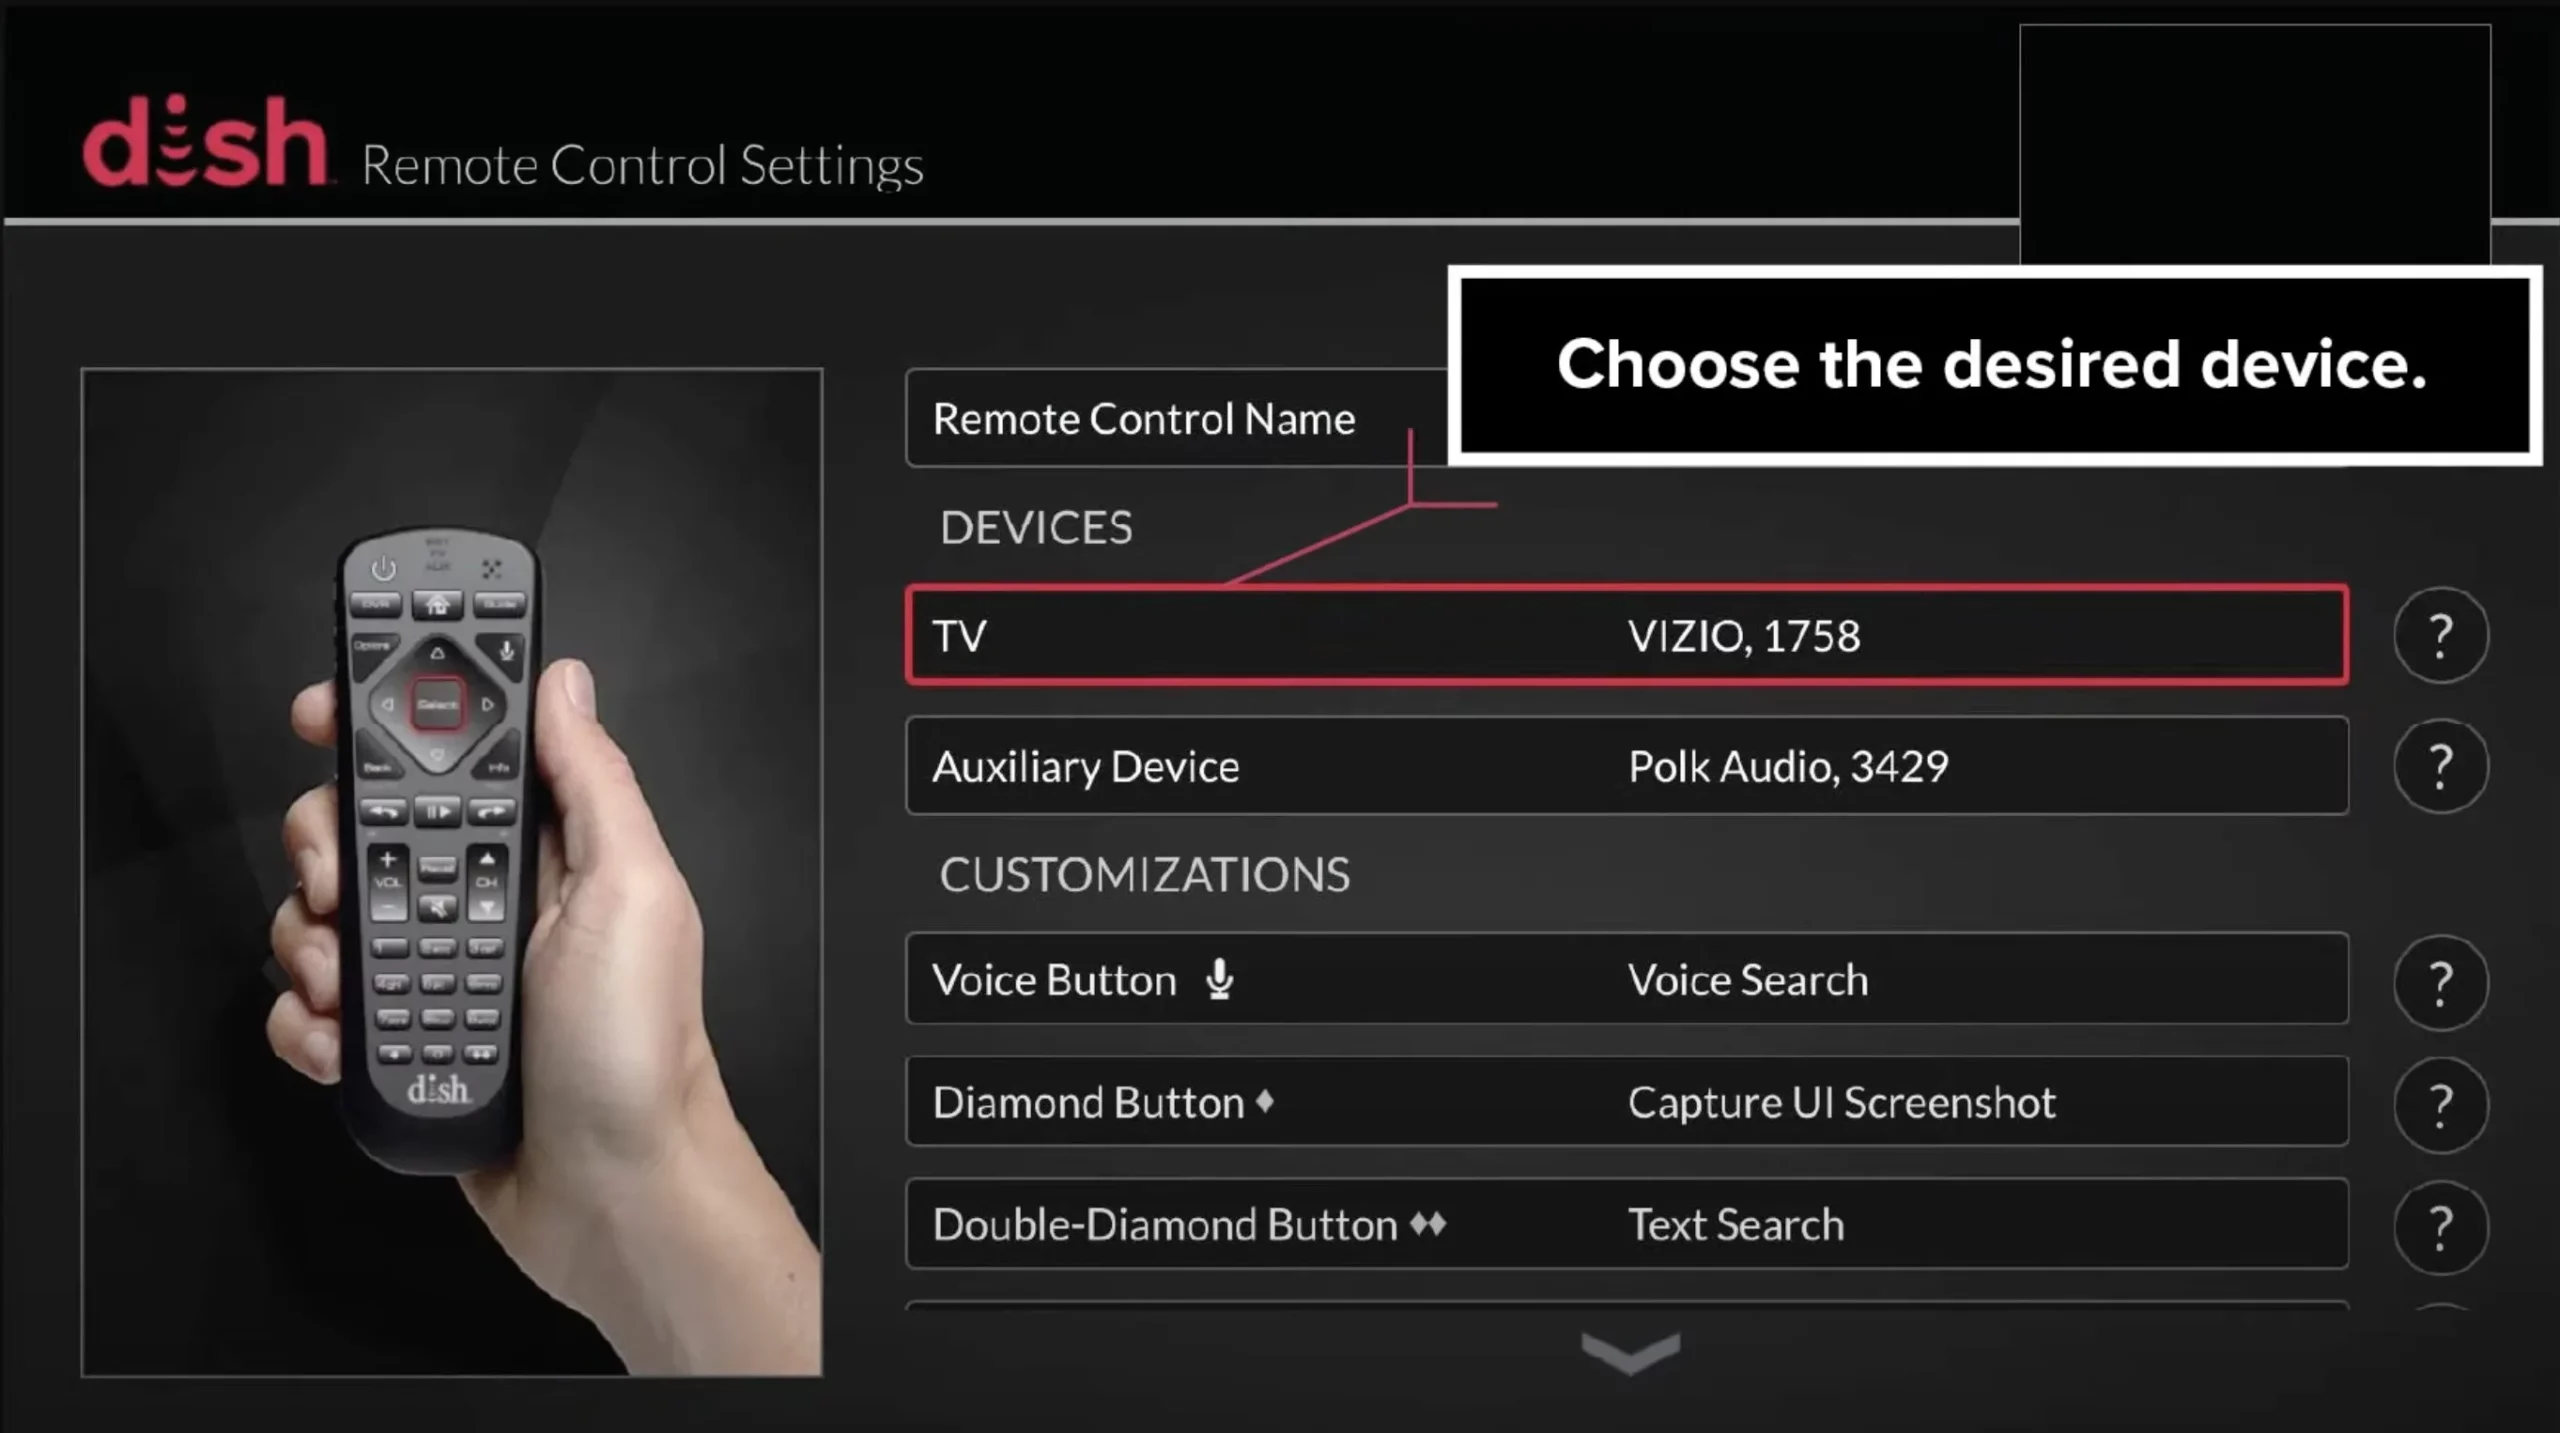 Choose the desired device with the Dish receiver